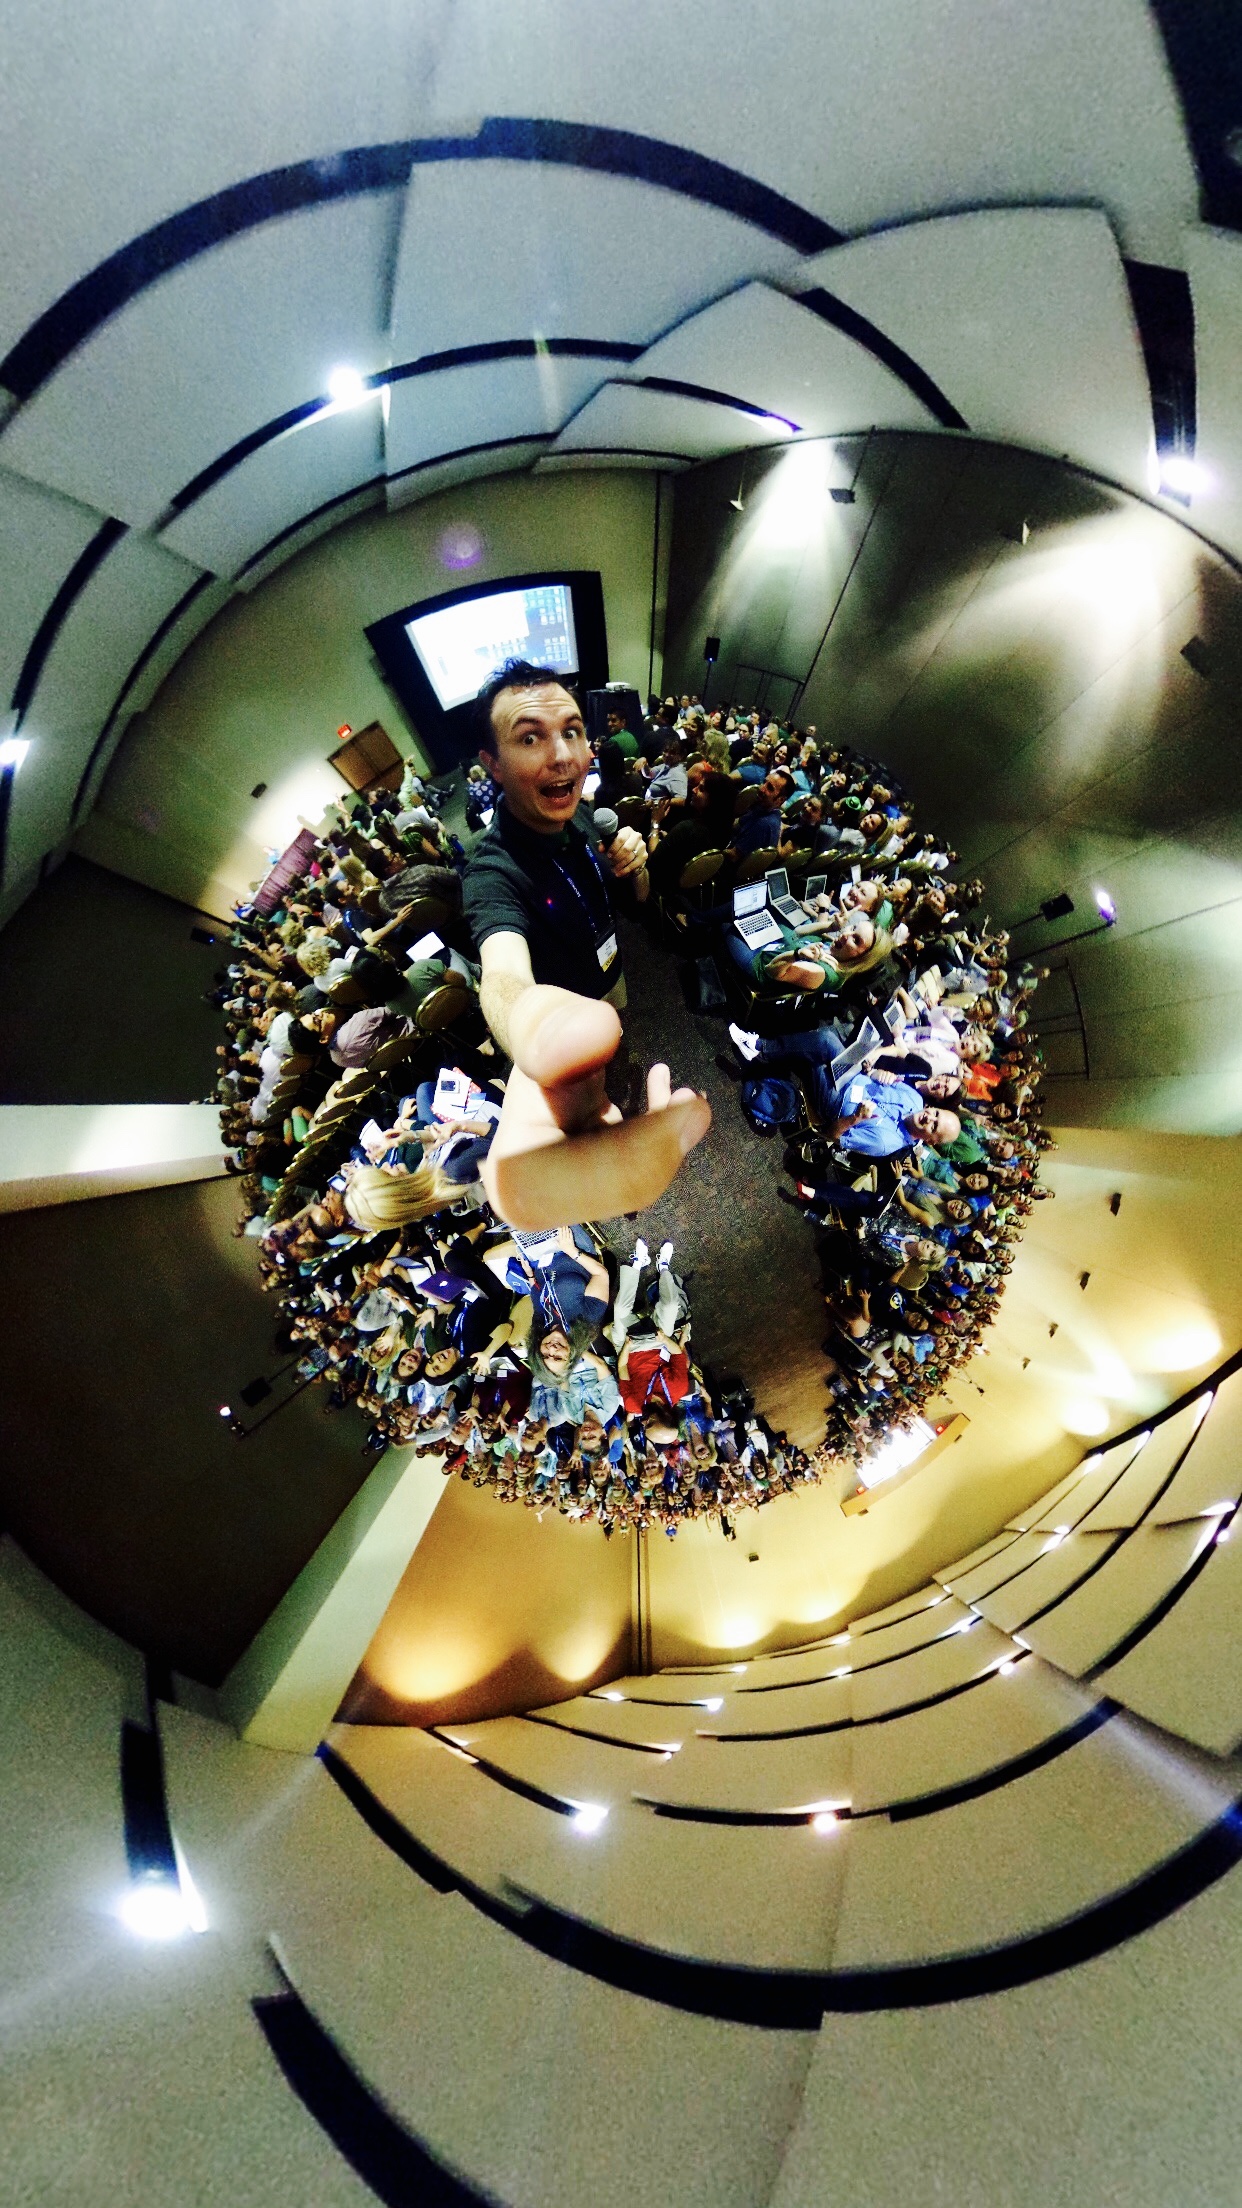 360º image of Bill Selak with 1000 conference attendees